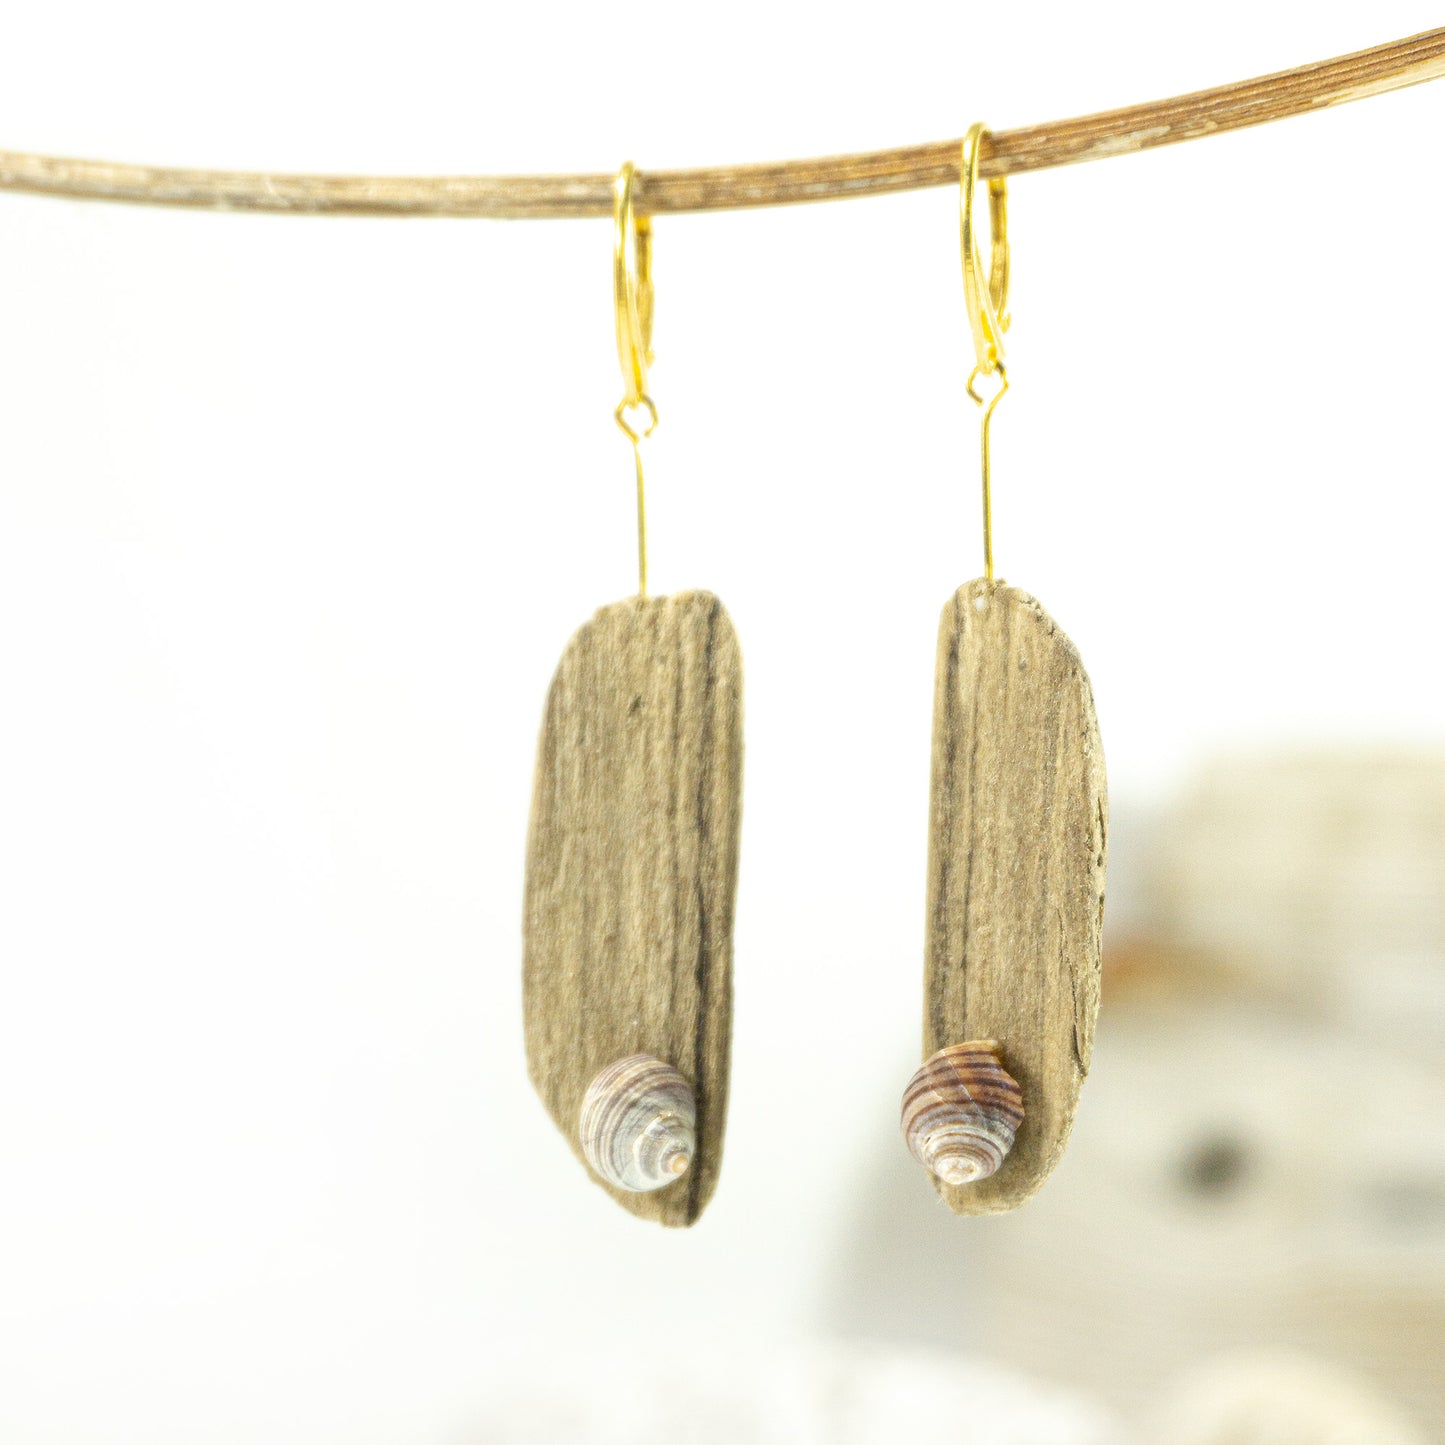 Unique Driftwood Earrings SABINE with Seashells and gold-plated 925 Silver